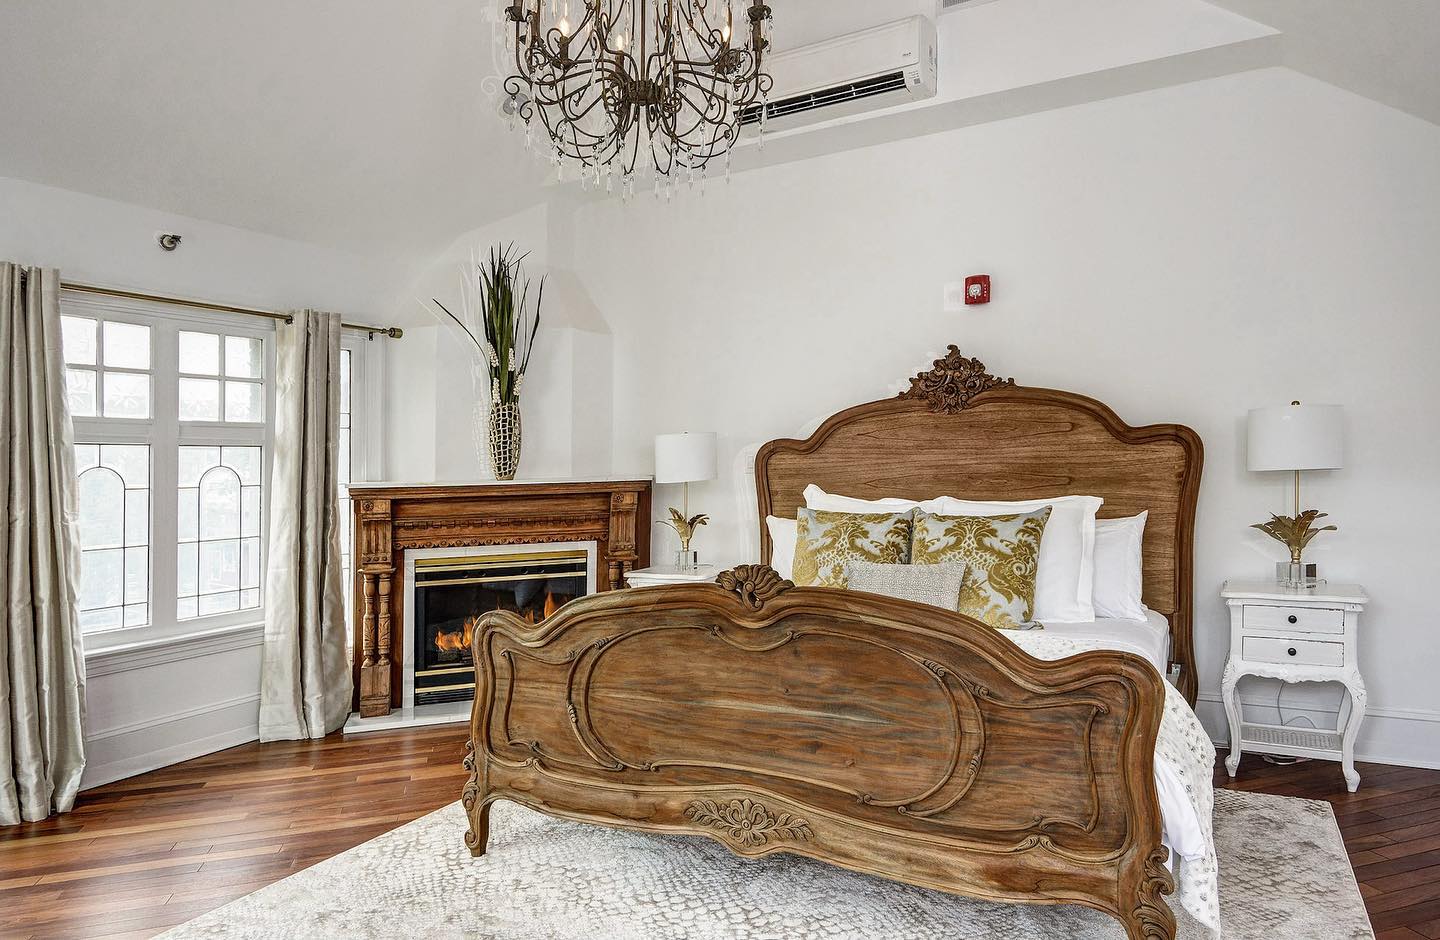 With sophisticated serene decor Cassis is the most spacious room in the house with private balcony gas fireplace and large soaking tub Visit wwwThePeninsulaCapeMaycom for a weekend away